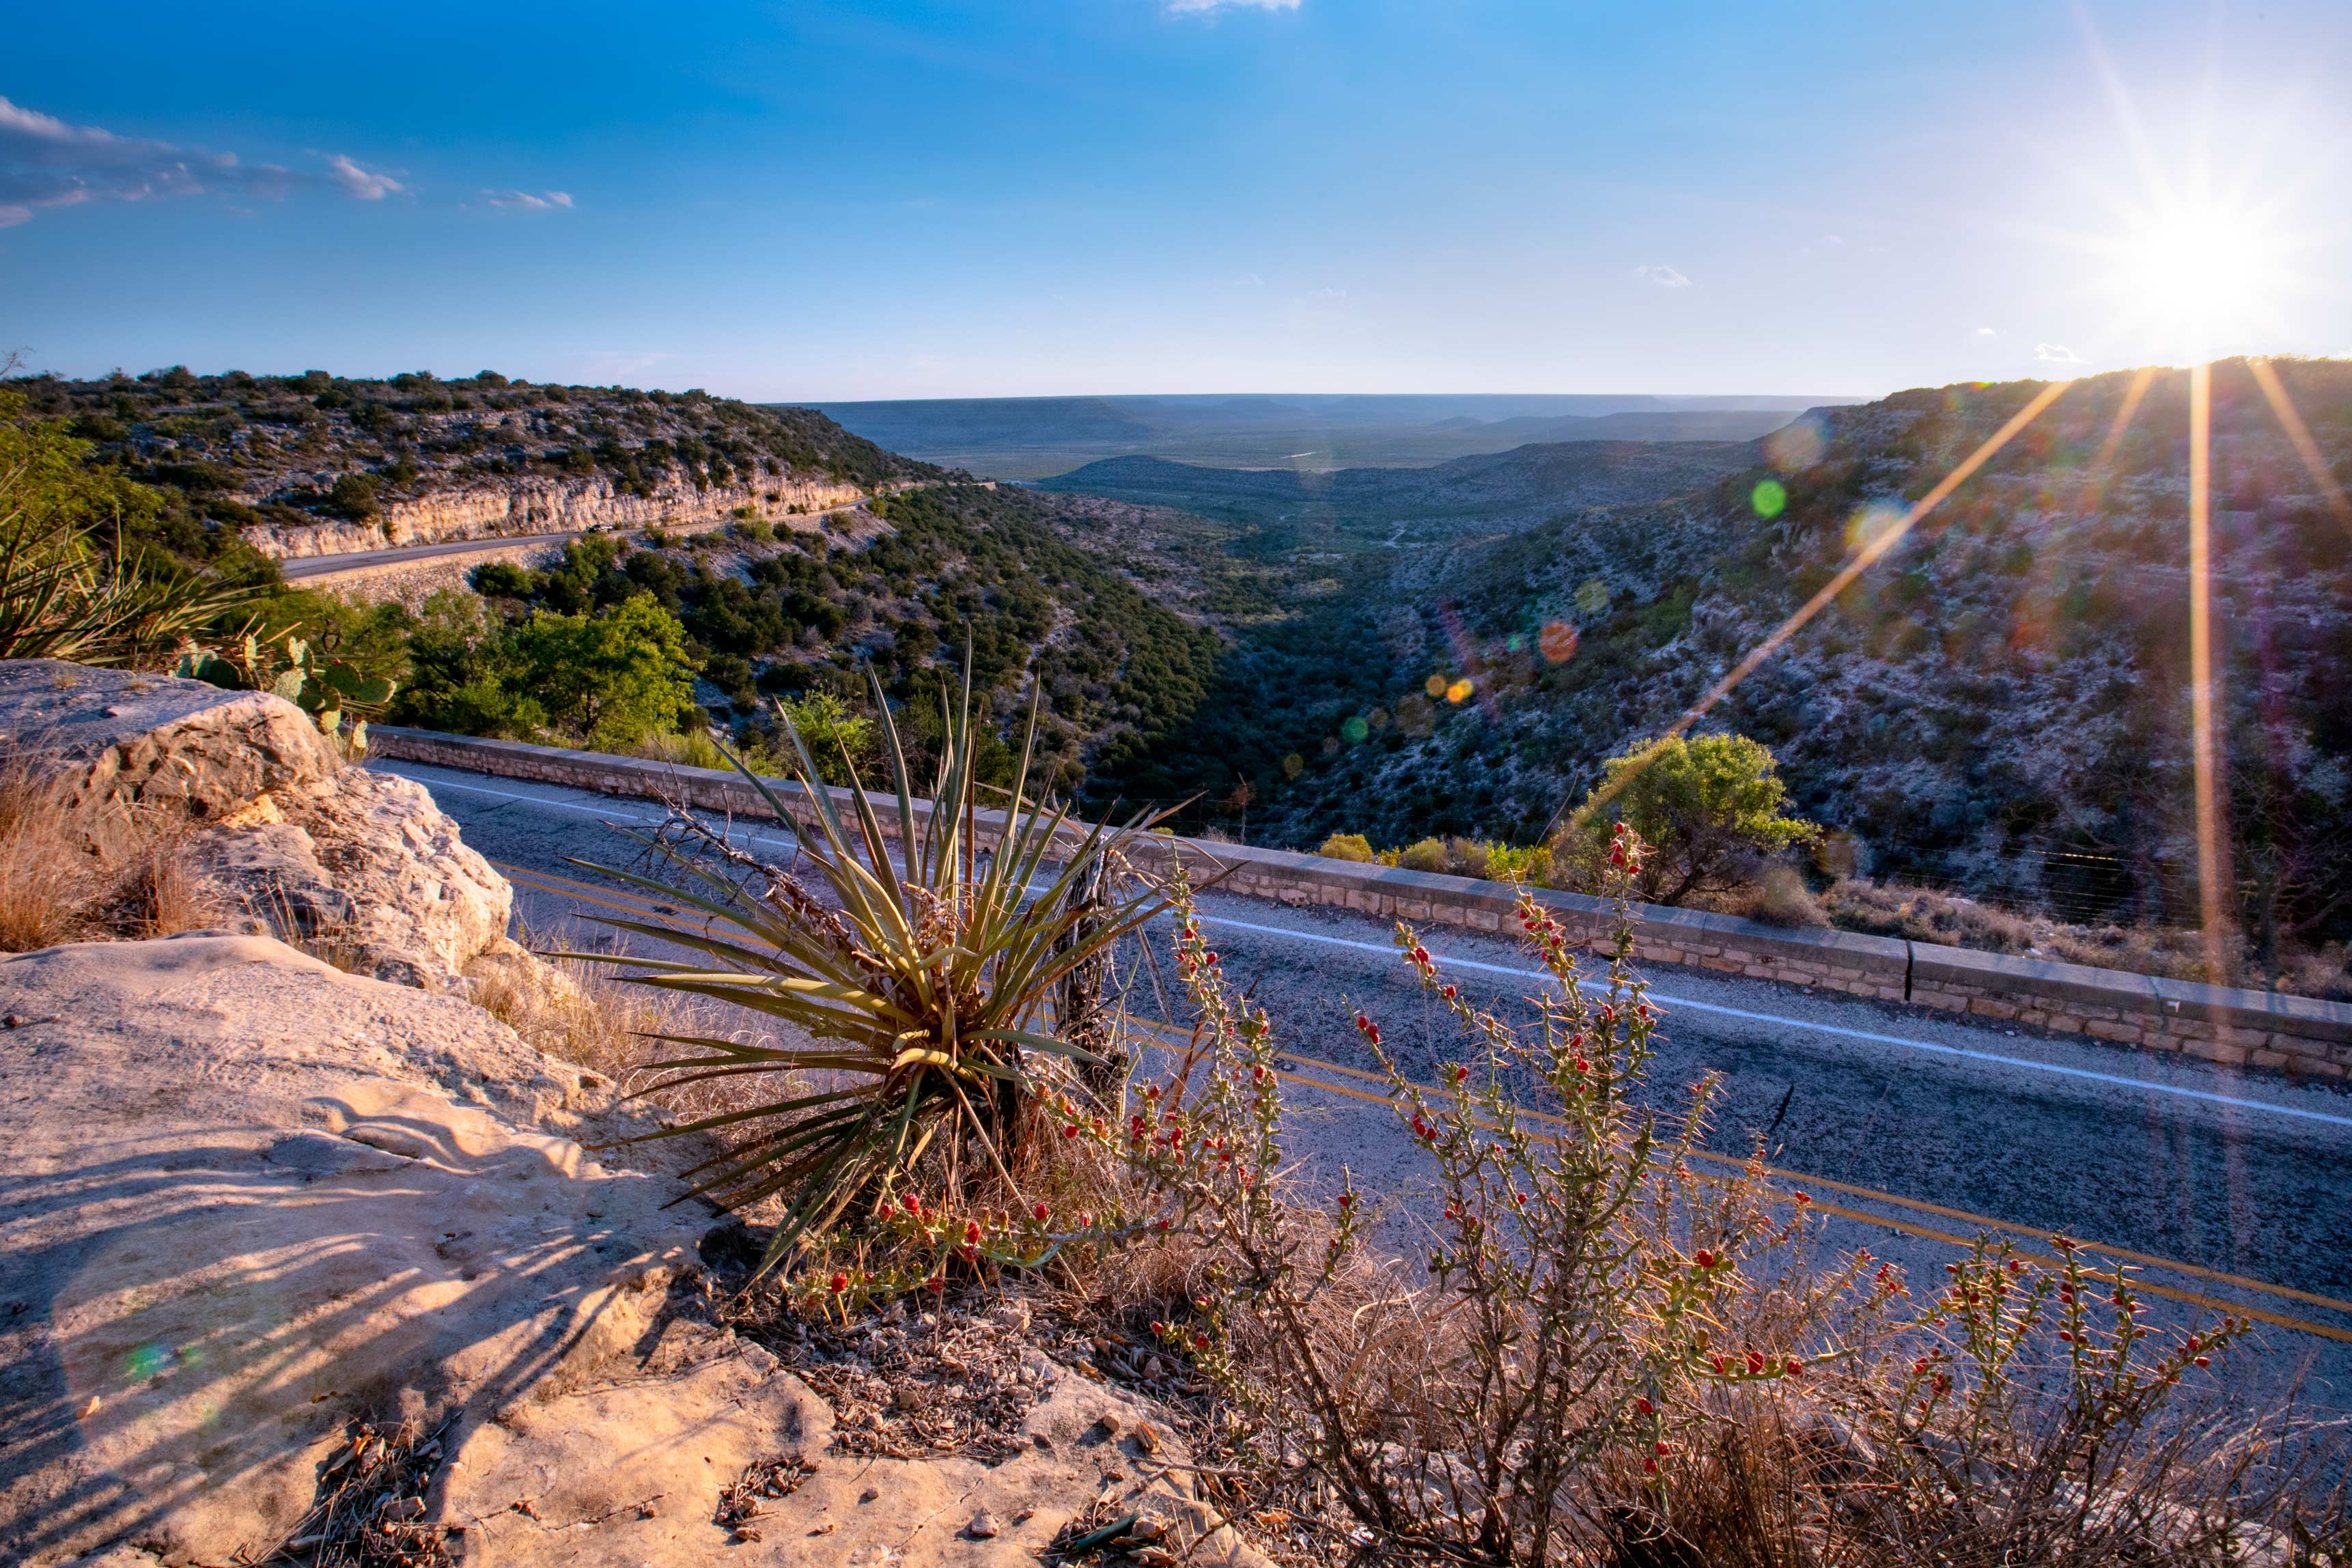 Overlooking the Pecos River Valley